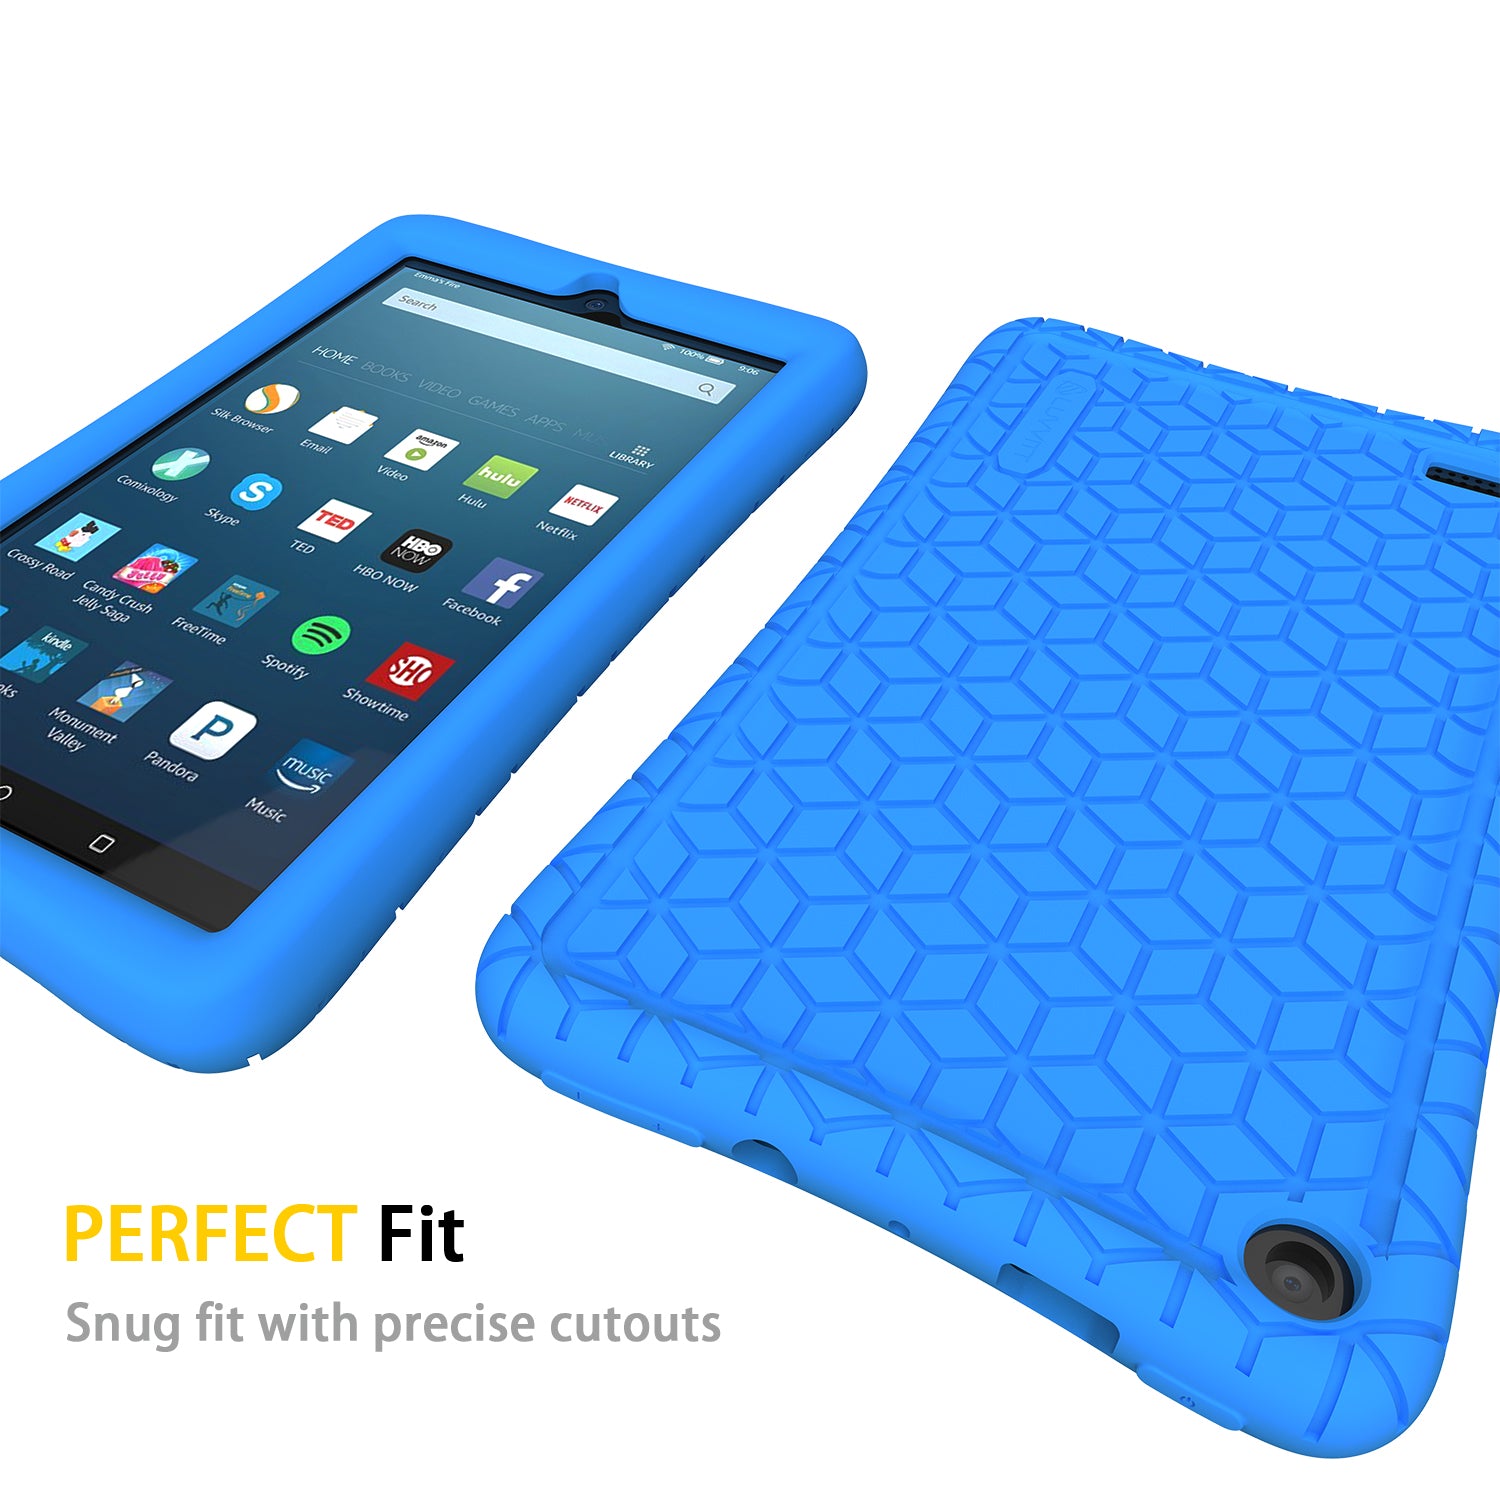 LUVVITT Case for Amazon Kindle Fire 7 Tablet (2107) - Blue